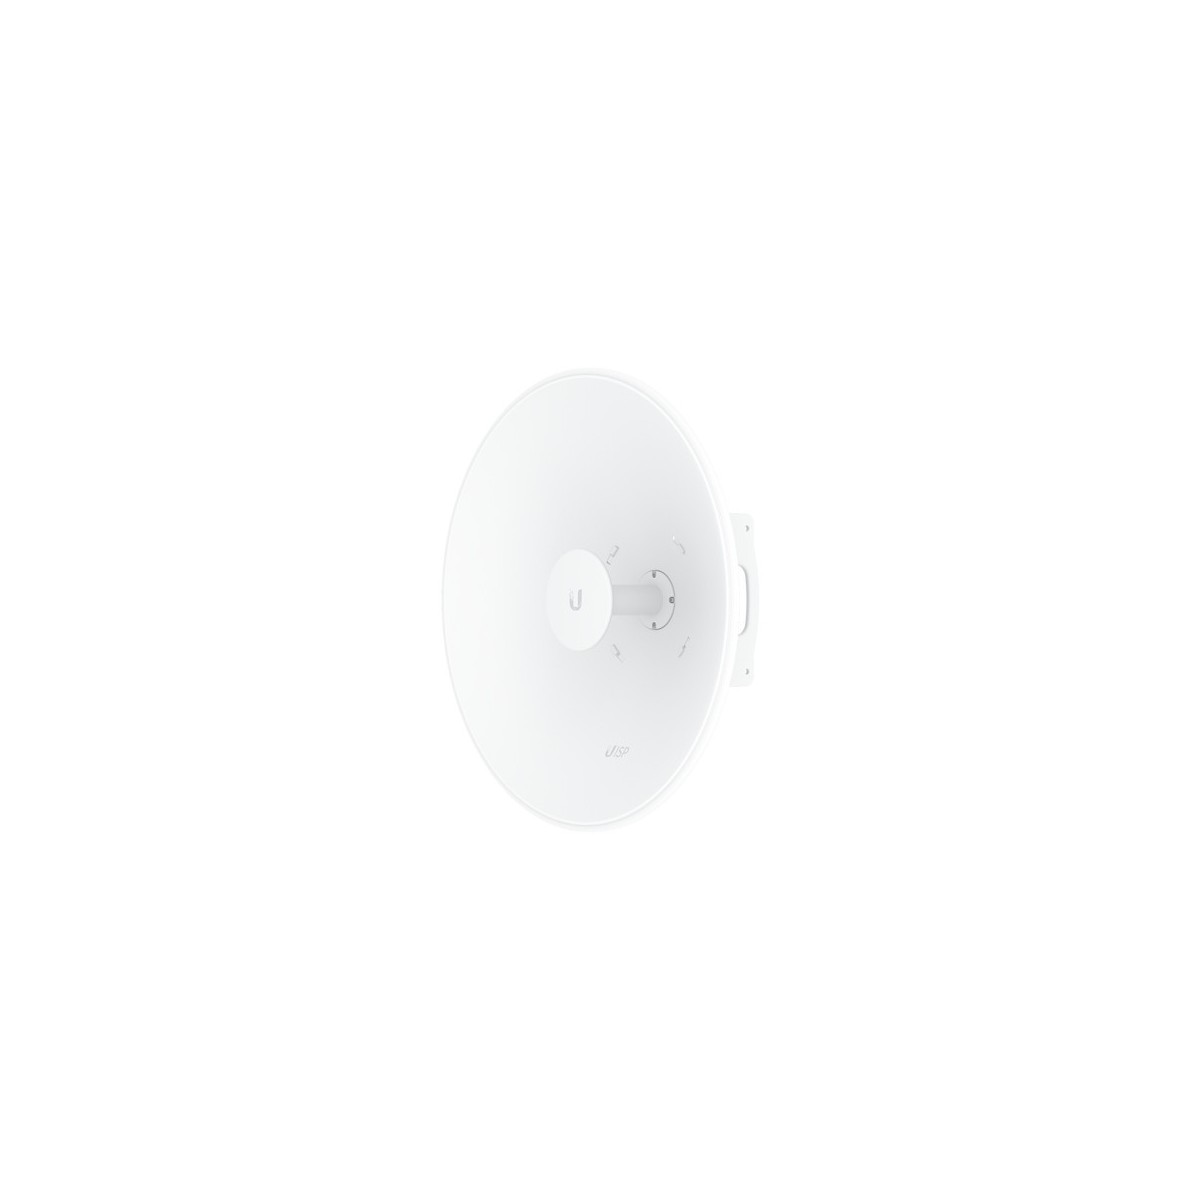 UbiQuiti Point-to-point PtP dish antenna that covers a wide